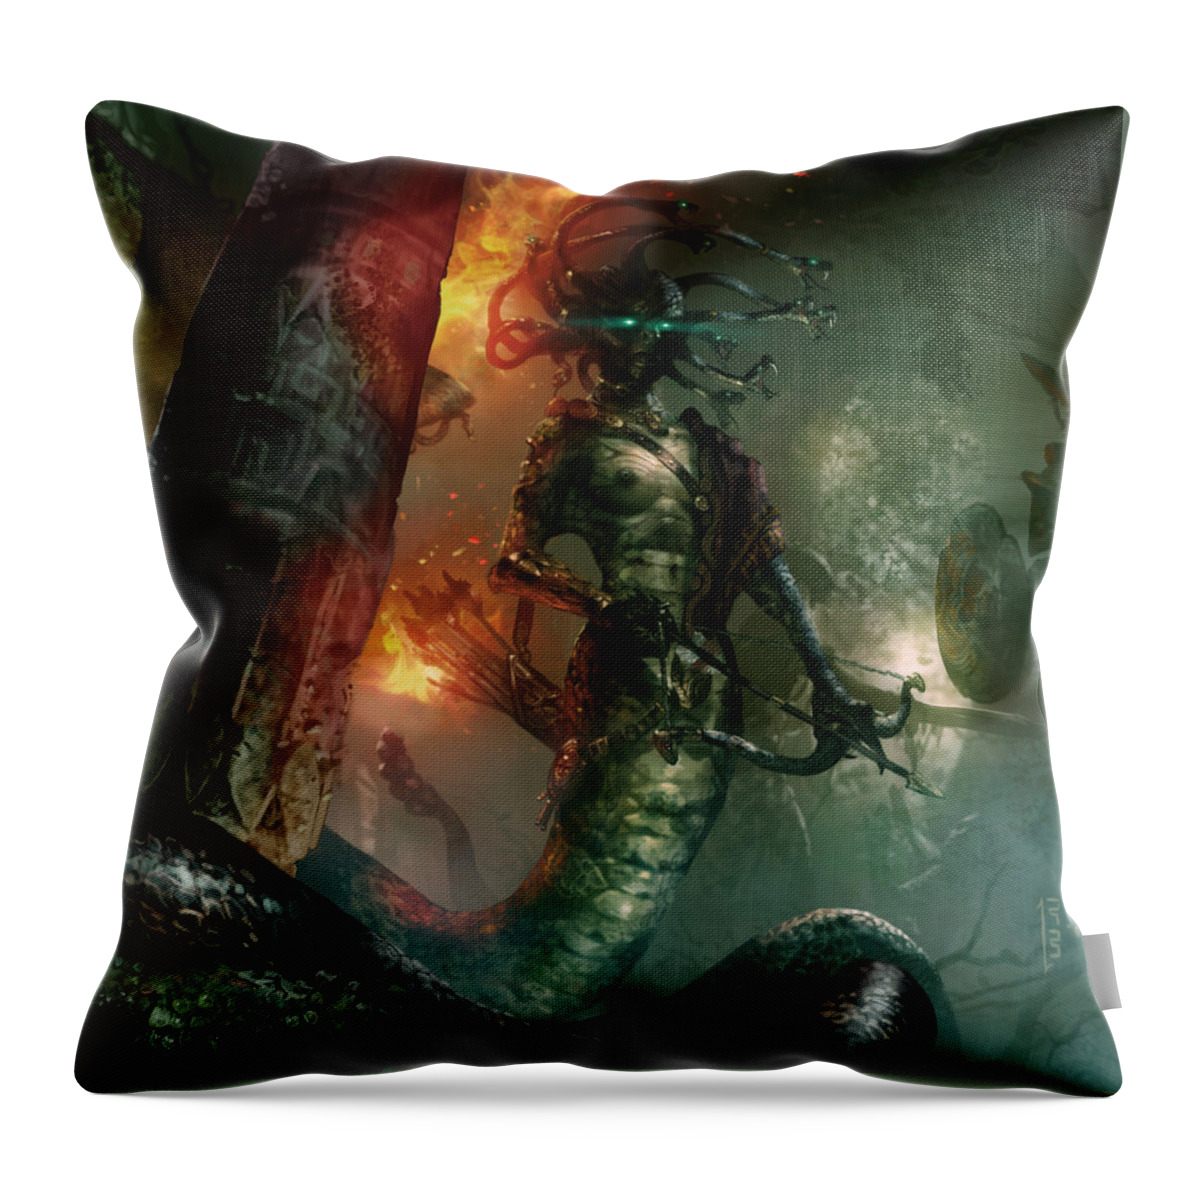 Gorgon Throw Pillow featuring the digital art In the Lair of the Gorgon by Ryan Barger